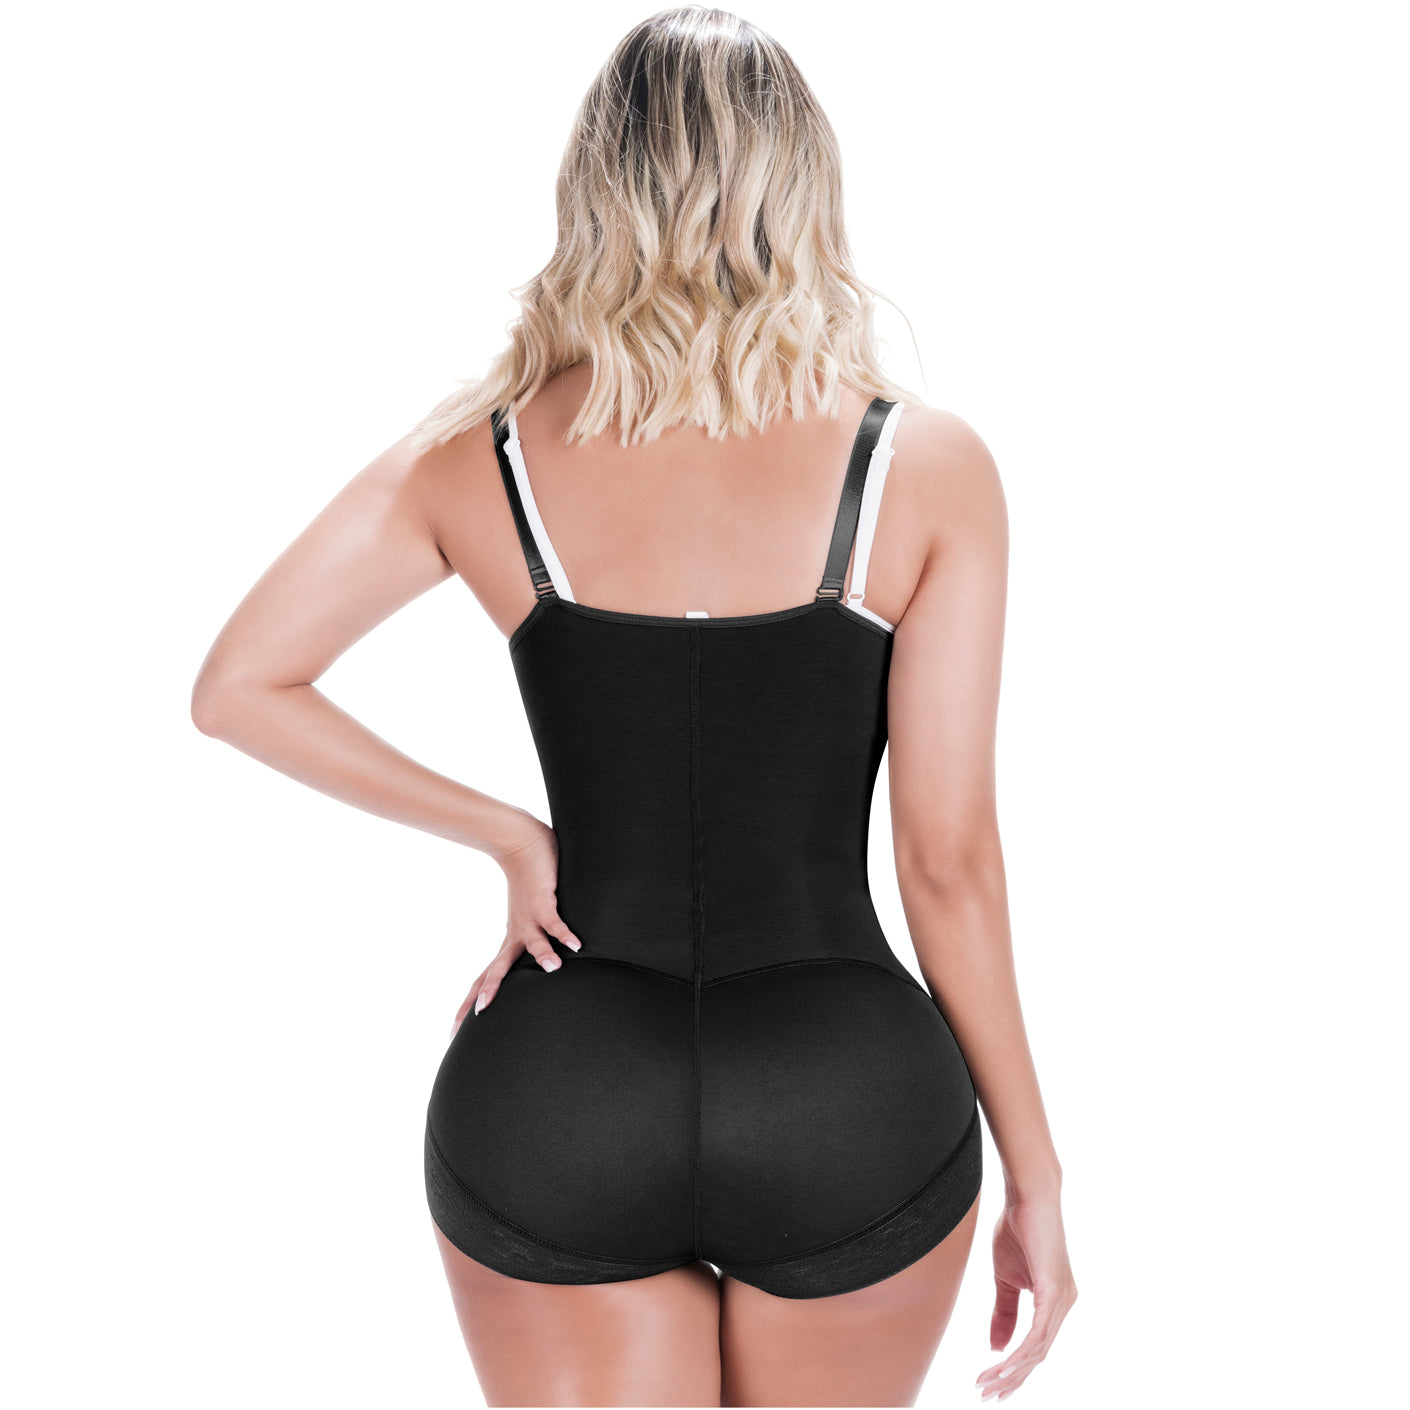 Sonryse: 046ZL - Colombian Slimming Body Shaper - Showmee Store